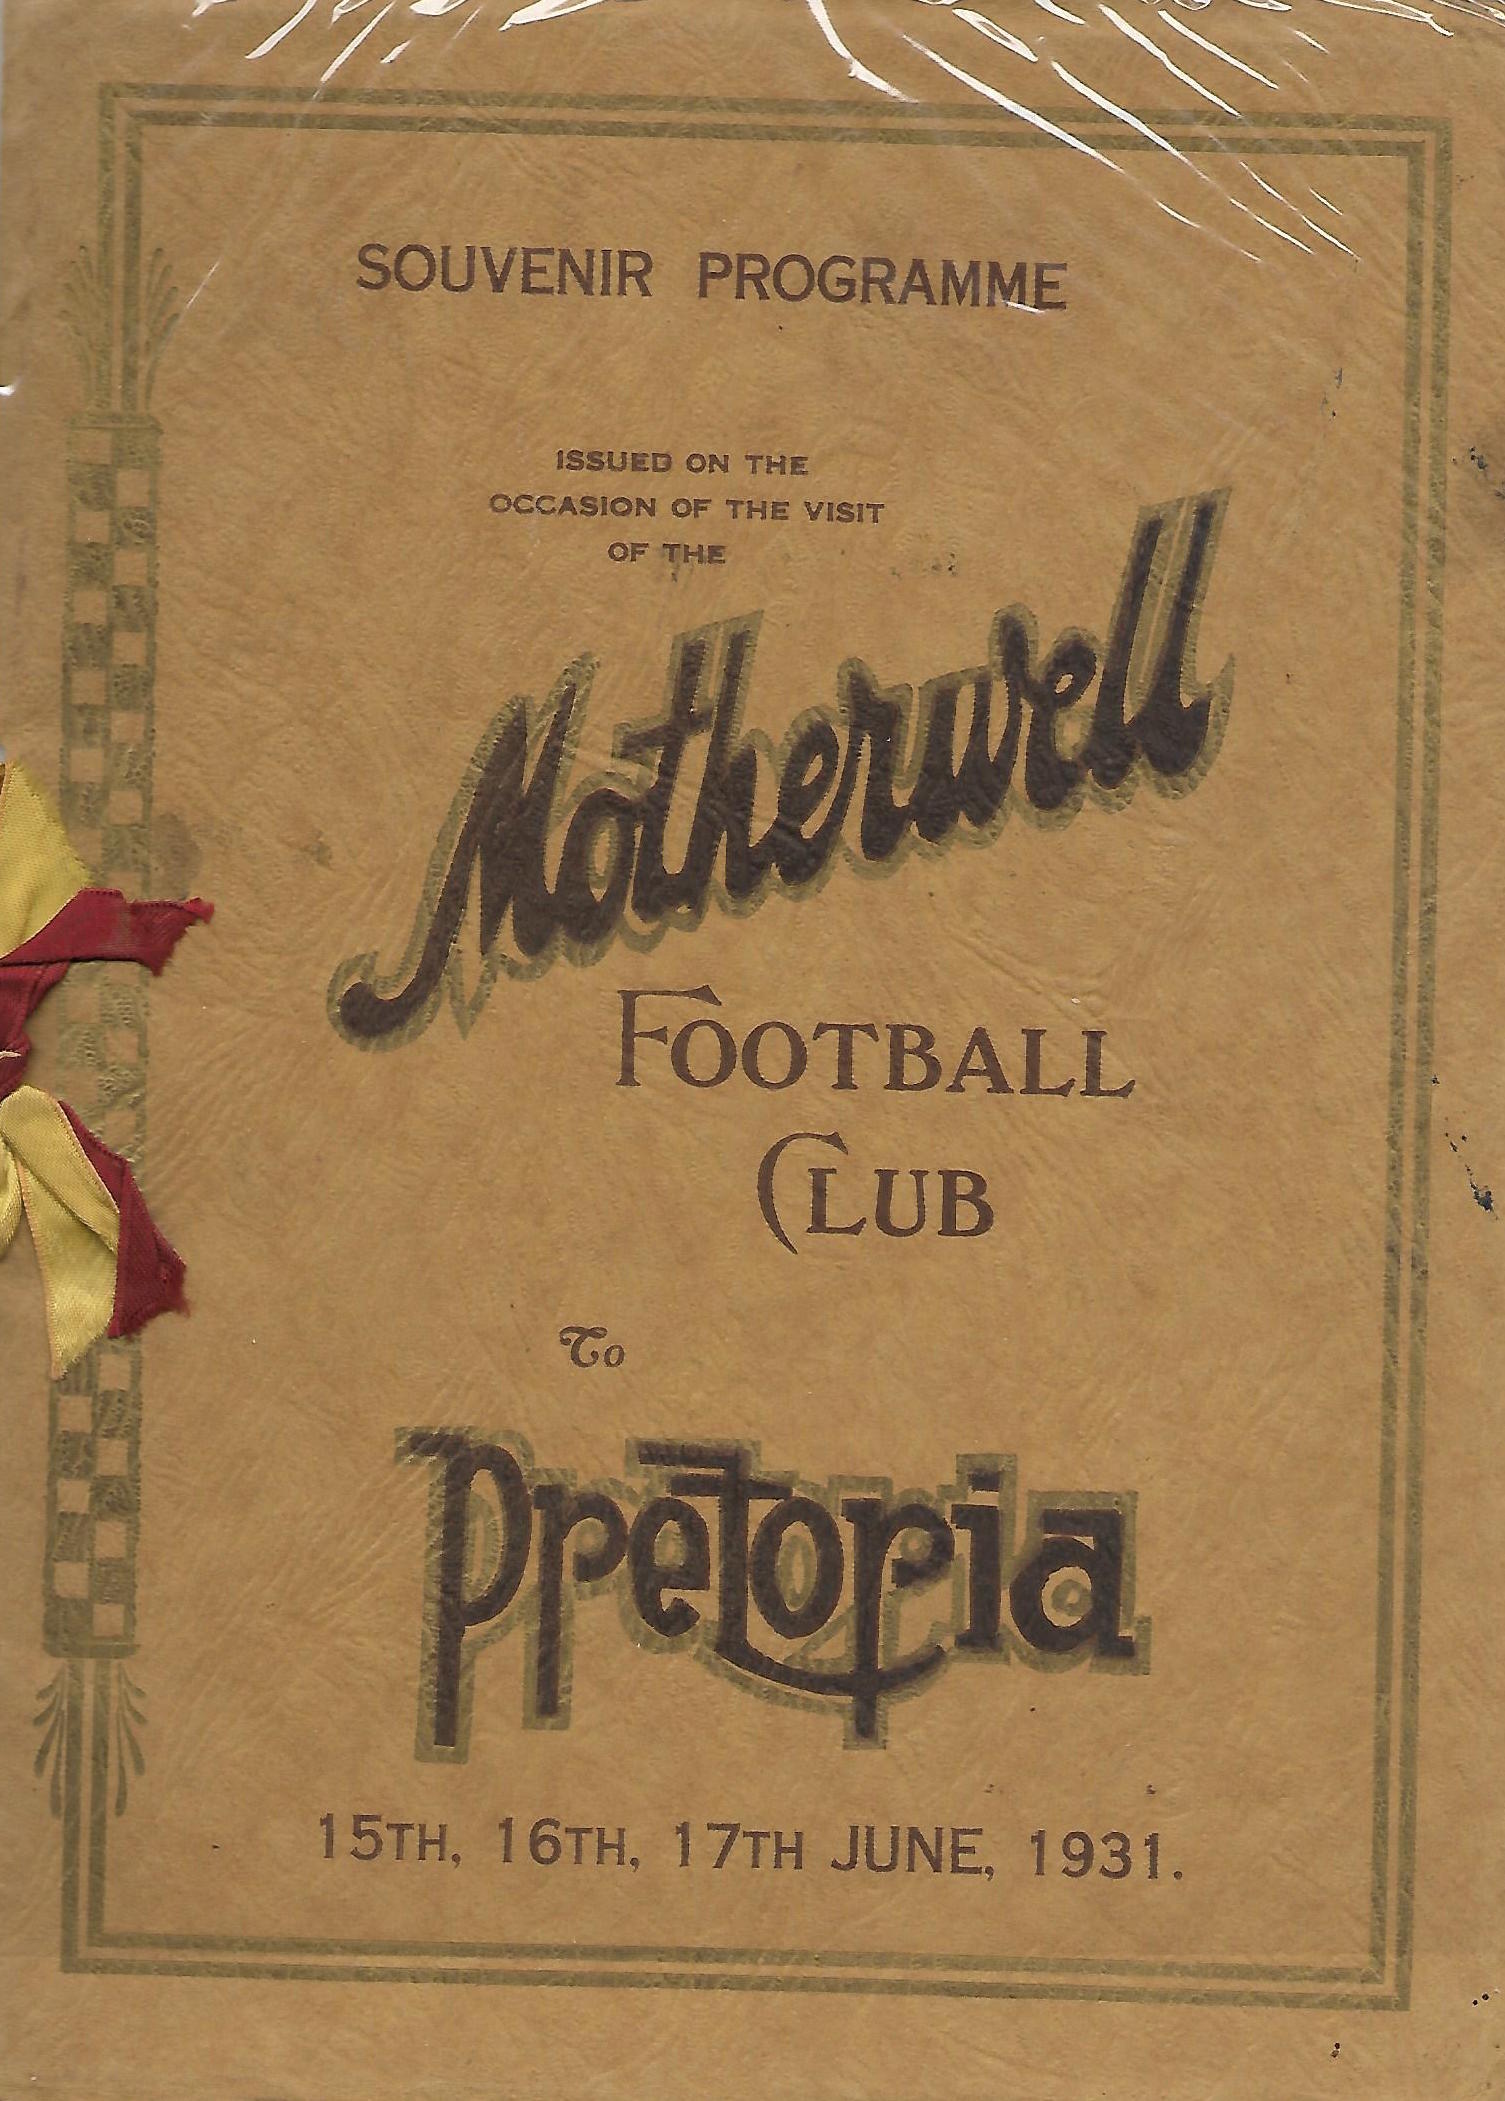 Programme South Africa Tour 1931 covering Pretoria 15th, 16th, 17th June